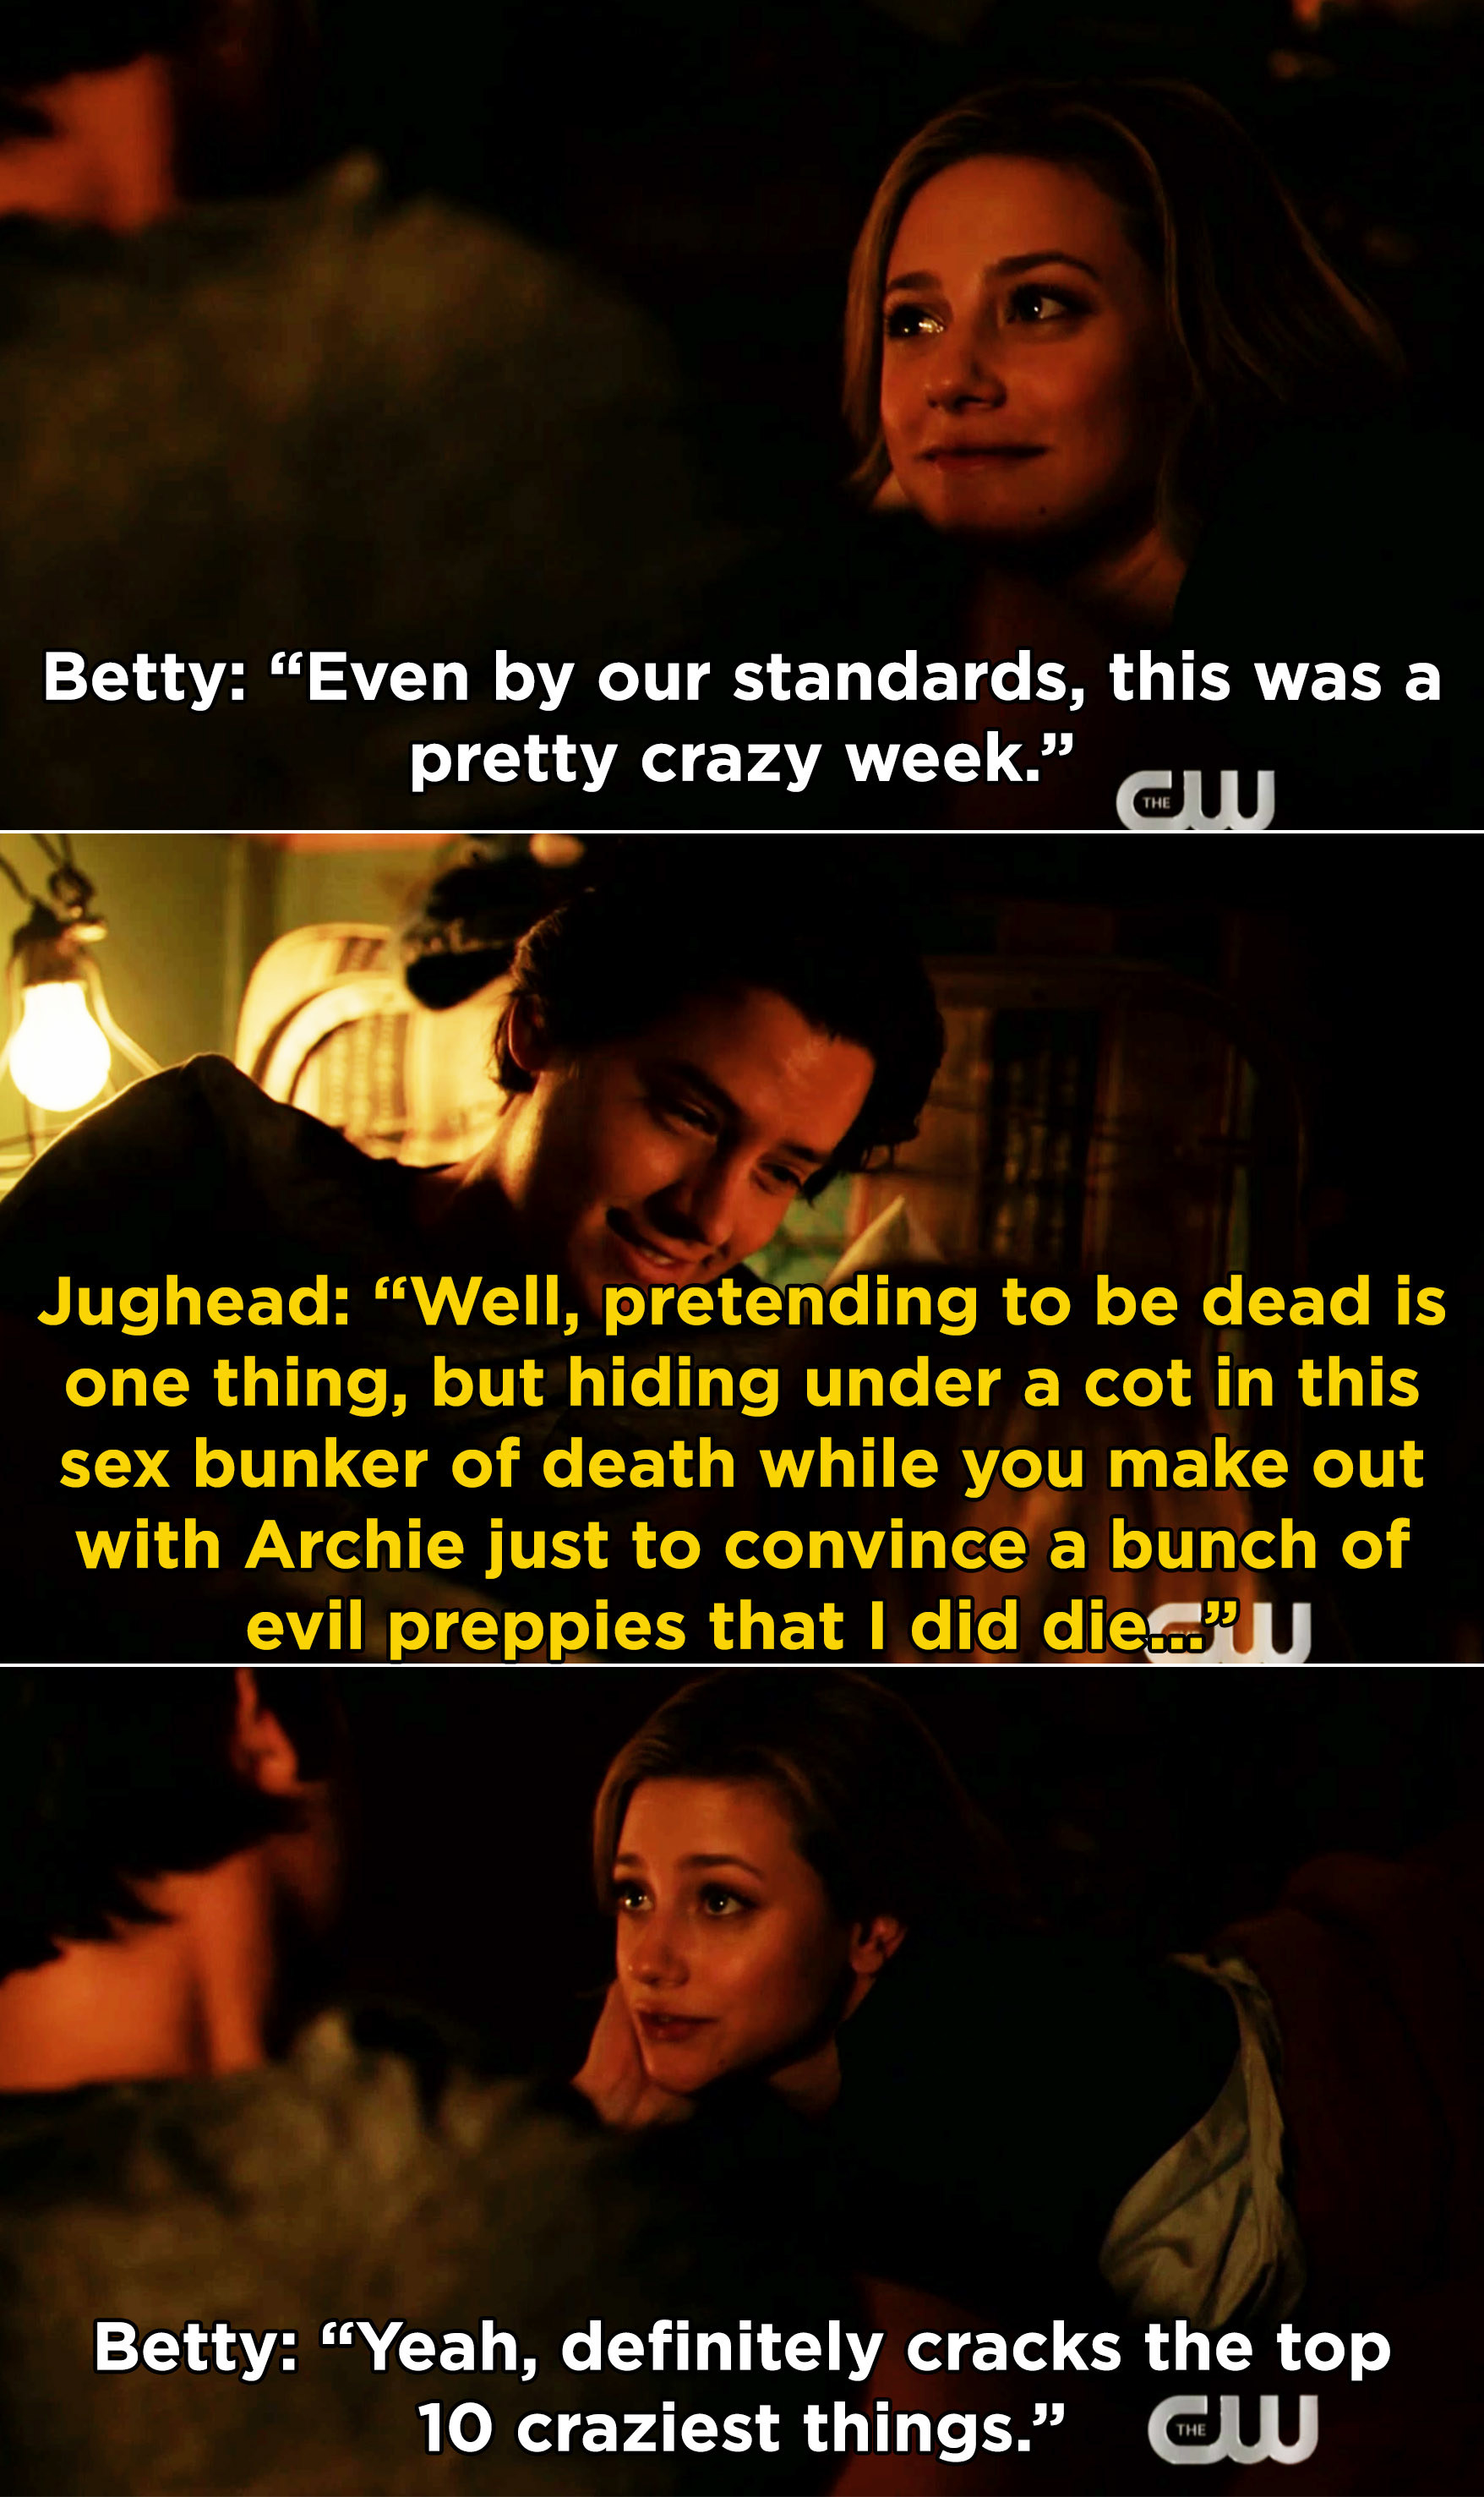 Jughead saying pretending to be dead is one thing, but hiding in the sex bunker of death is wild